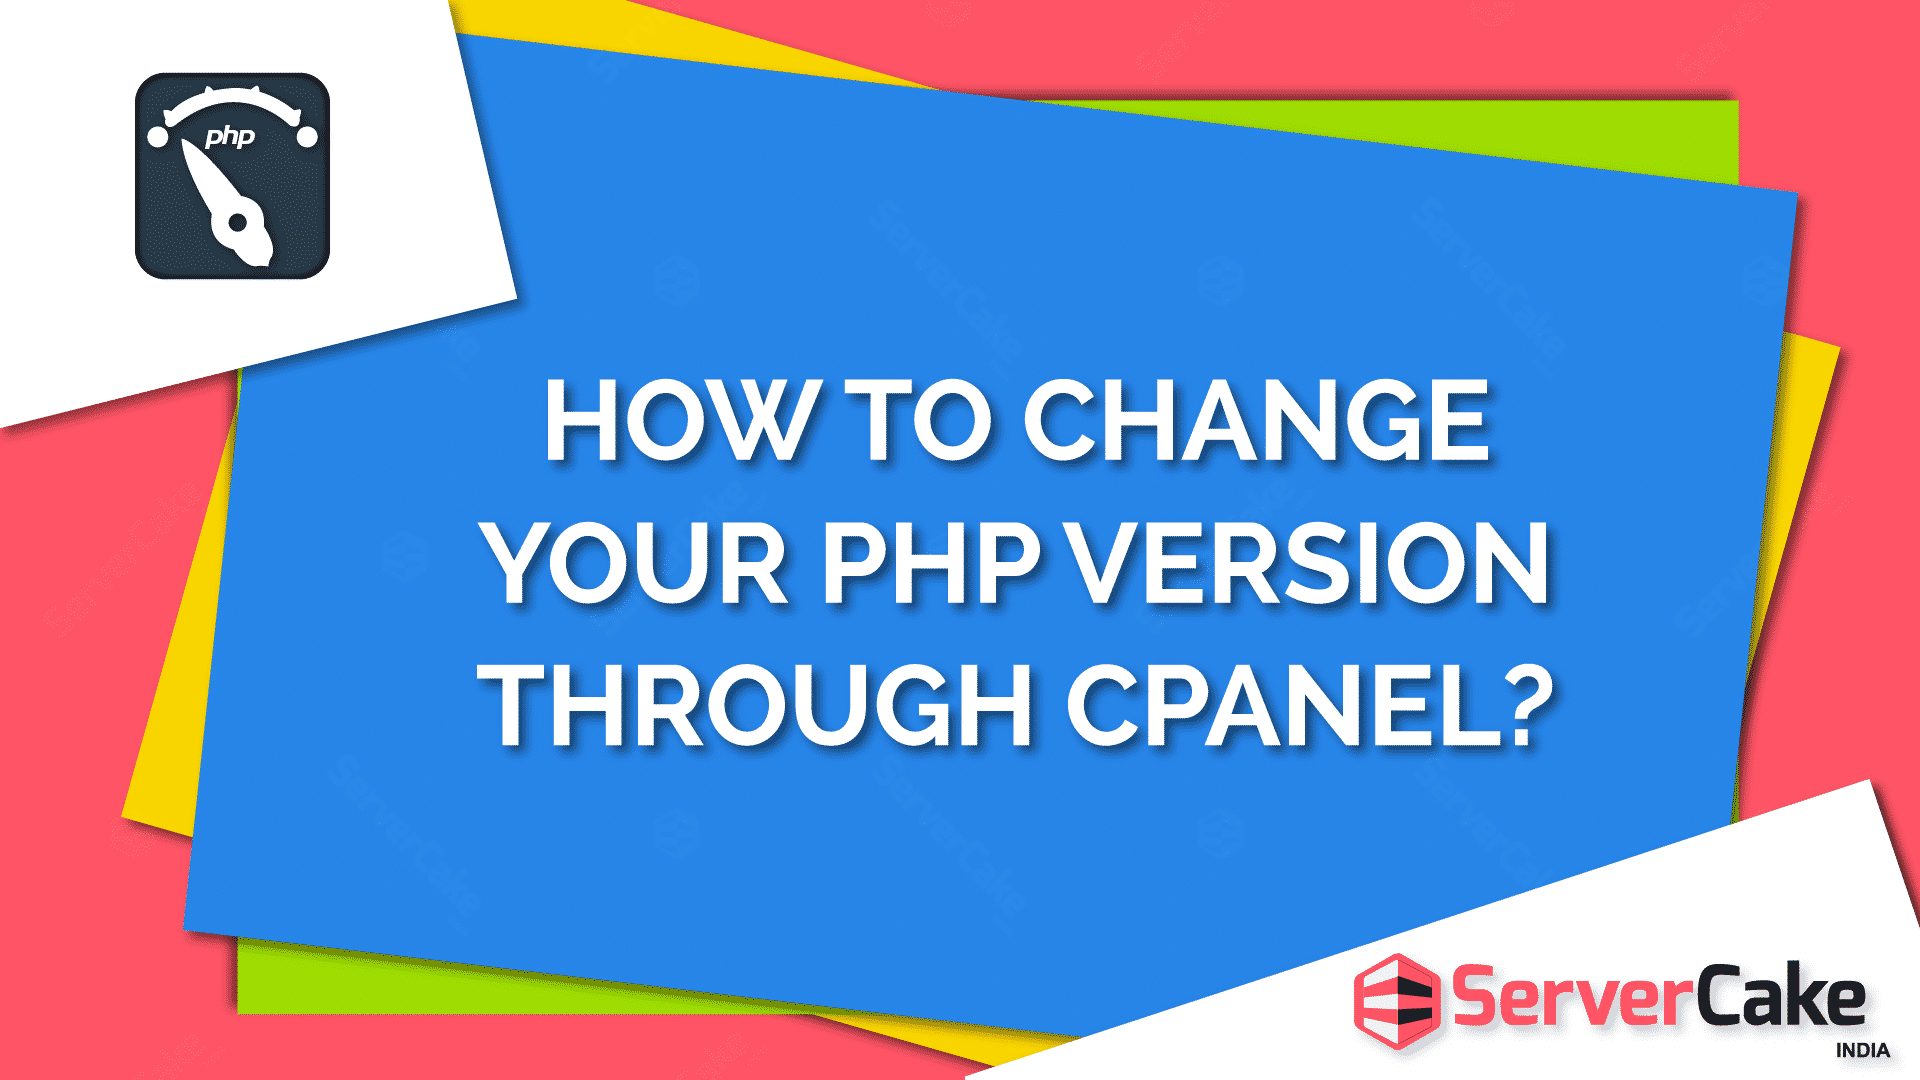 How to Change Your PHP version Through cPanel?